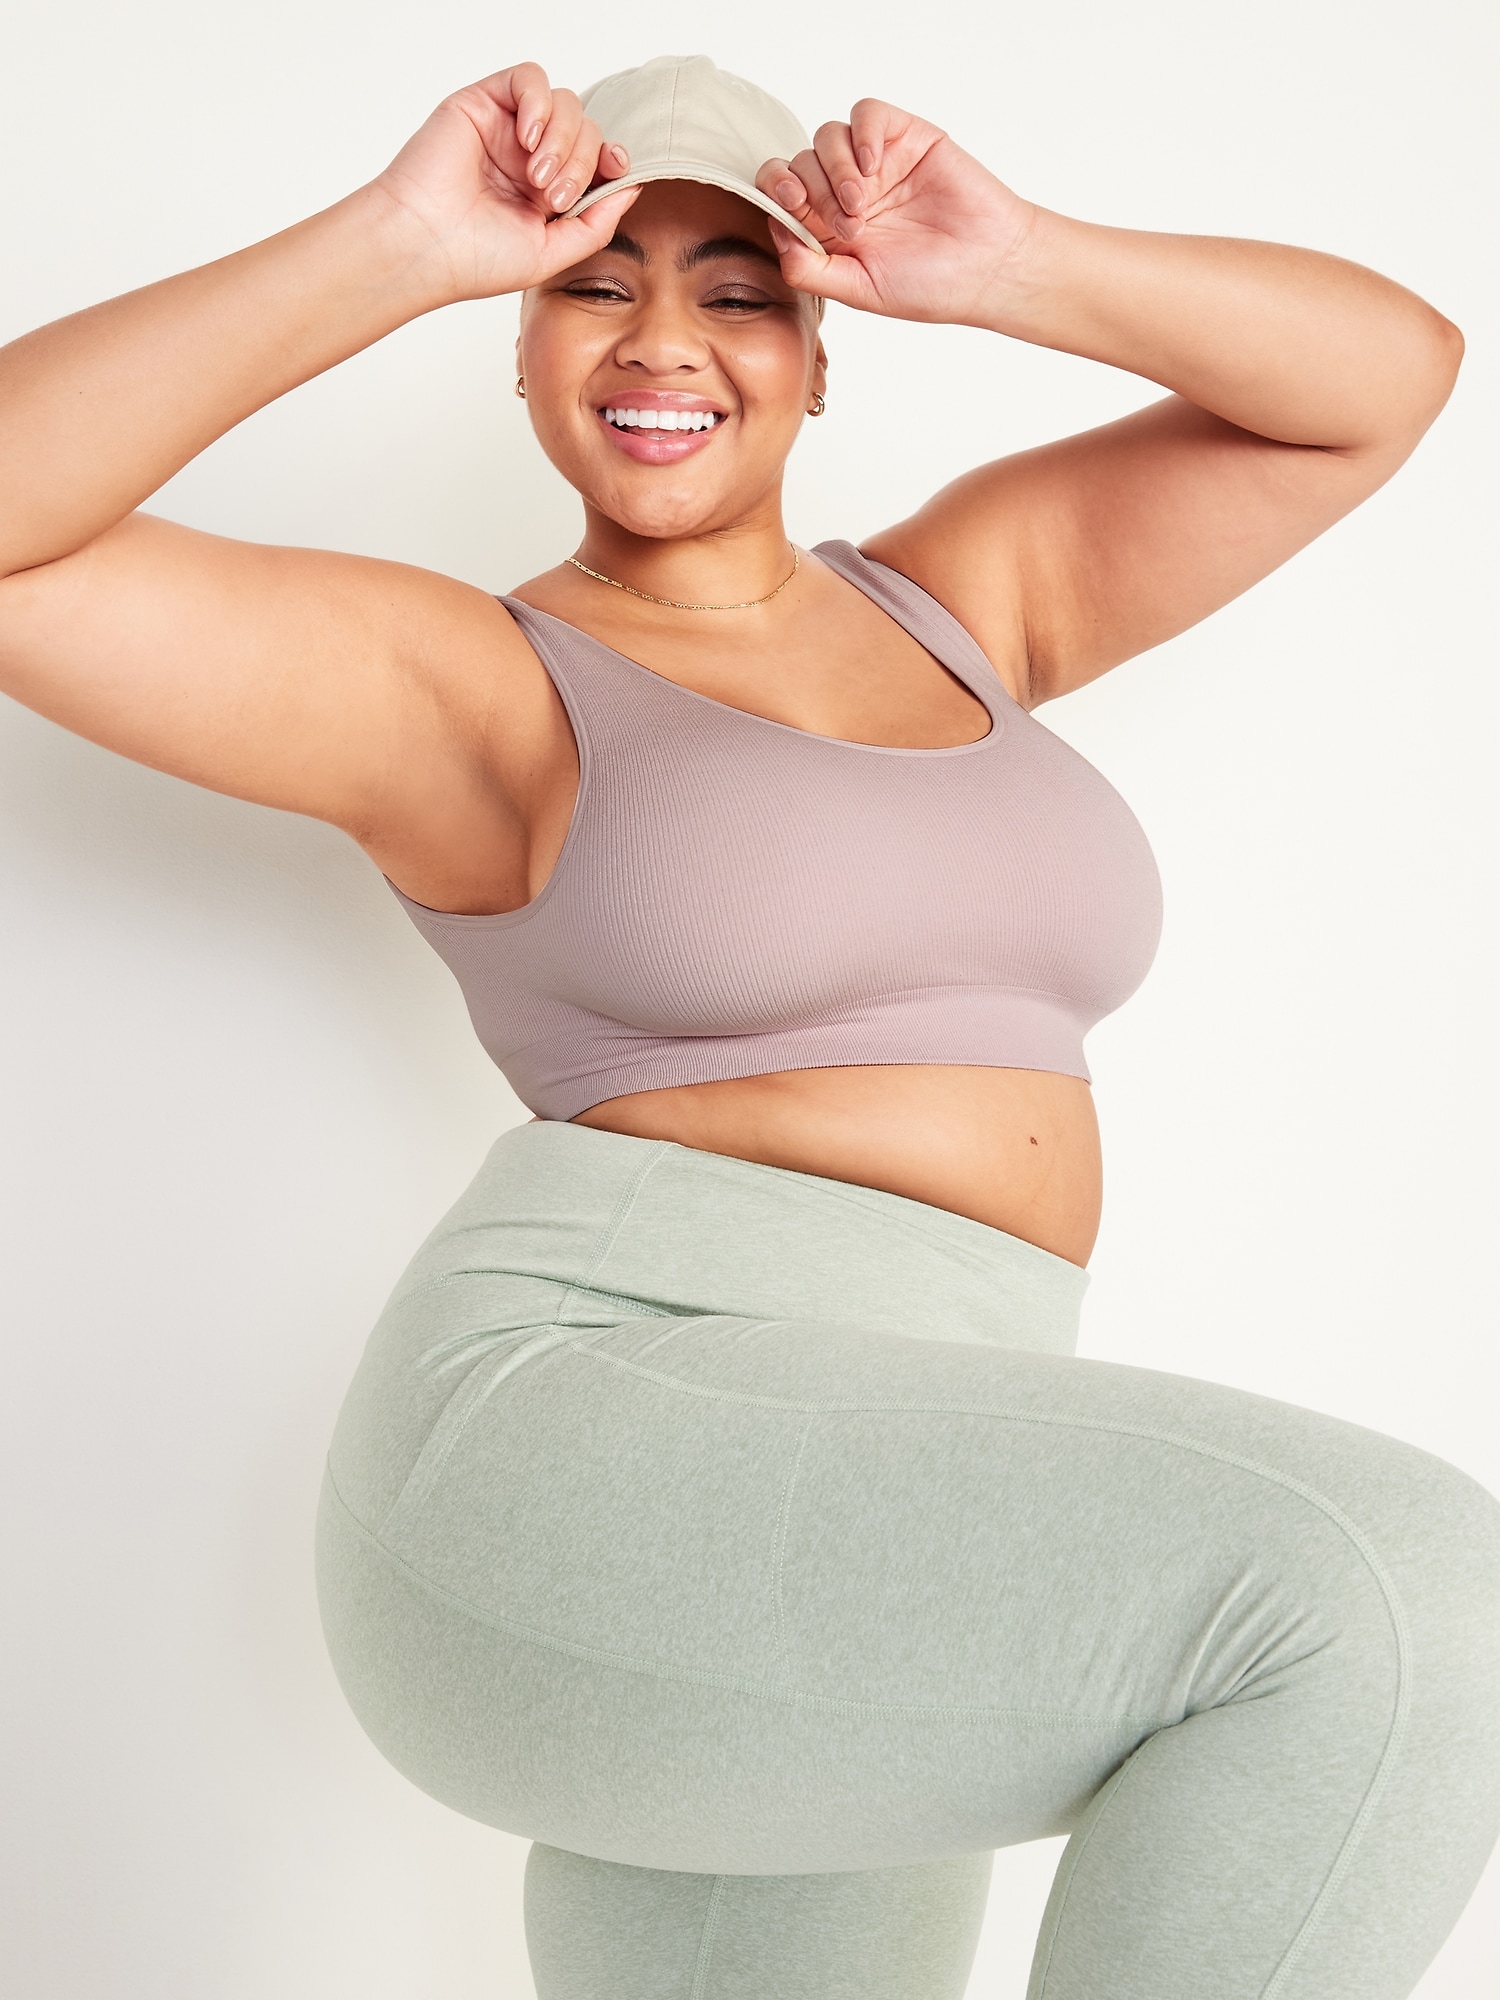 Old Navy Seamless Lounge Bralette Top